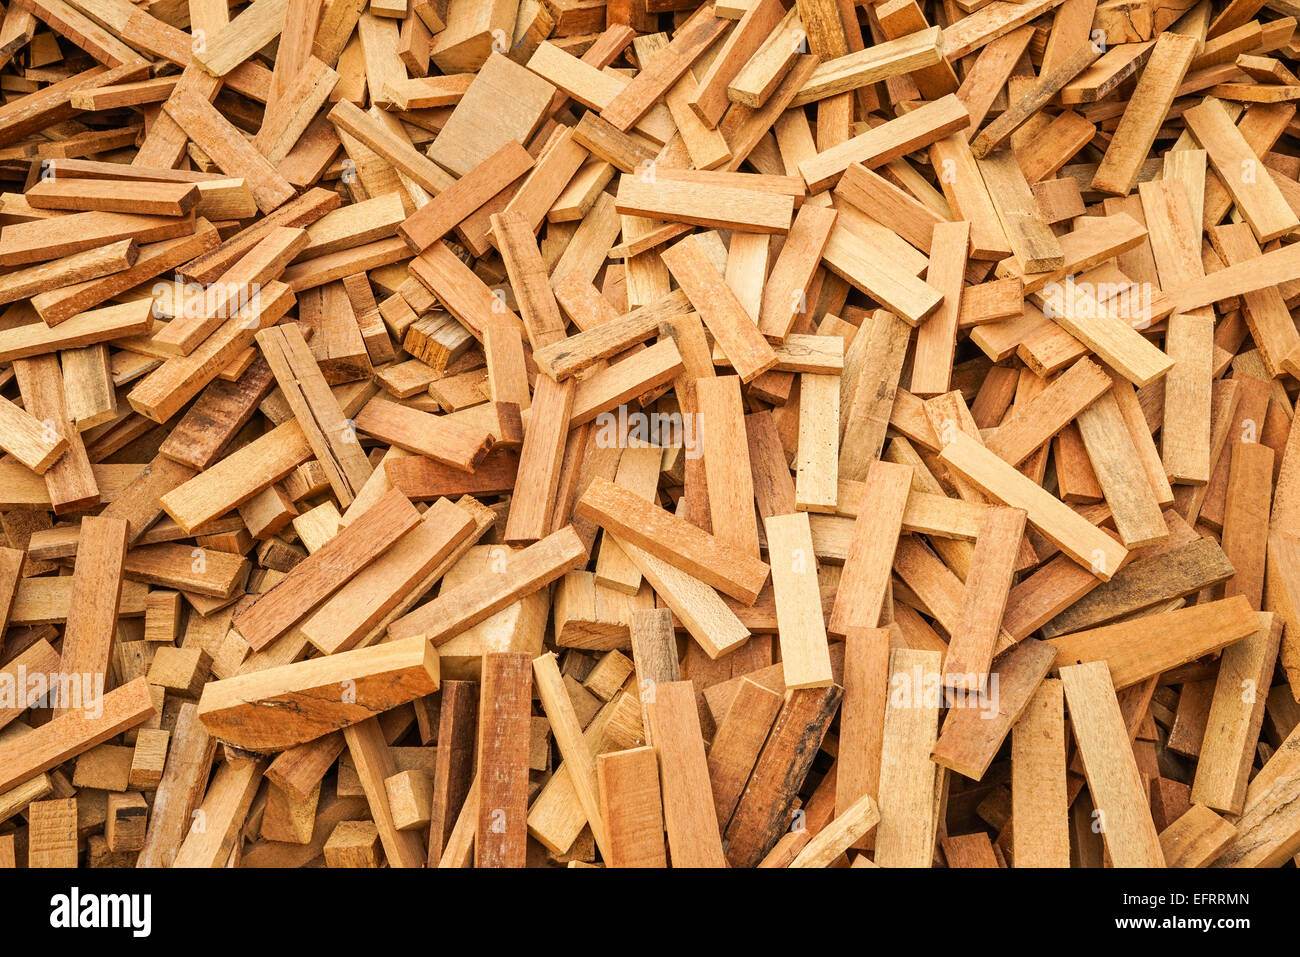 sew wood scraps ready for recycle process Stock Photo